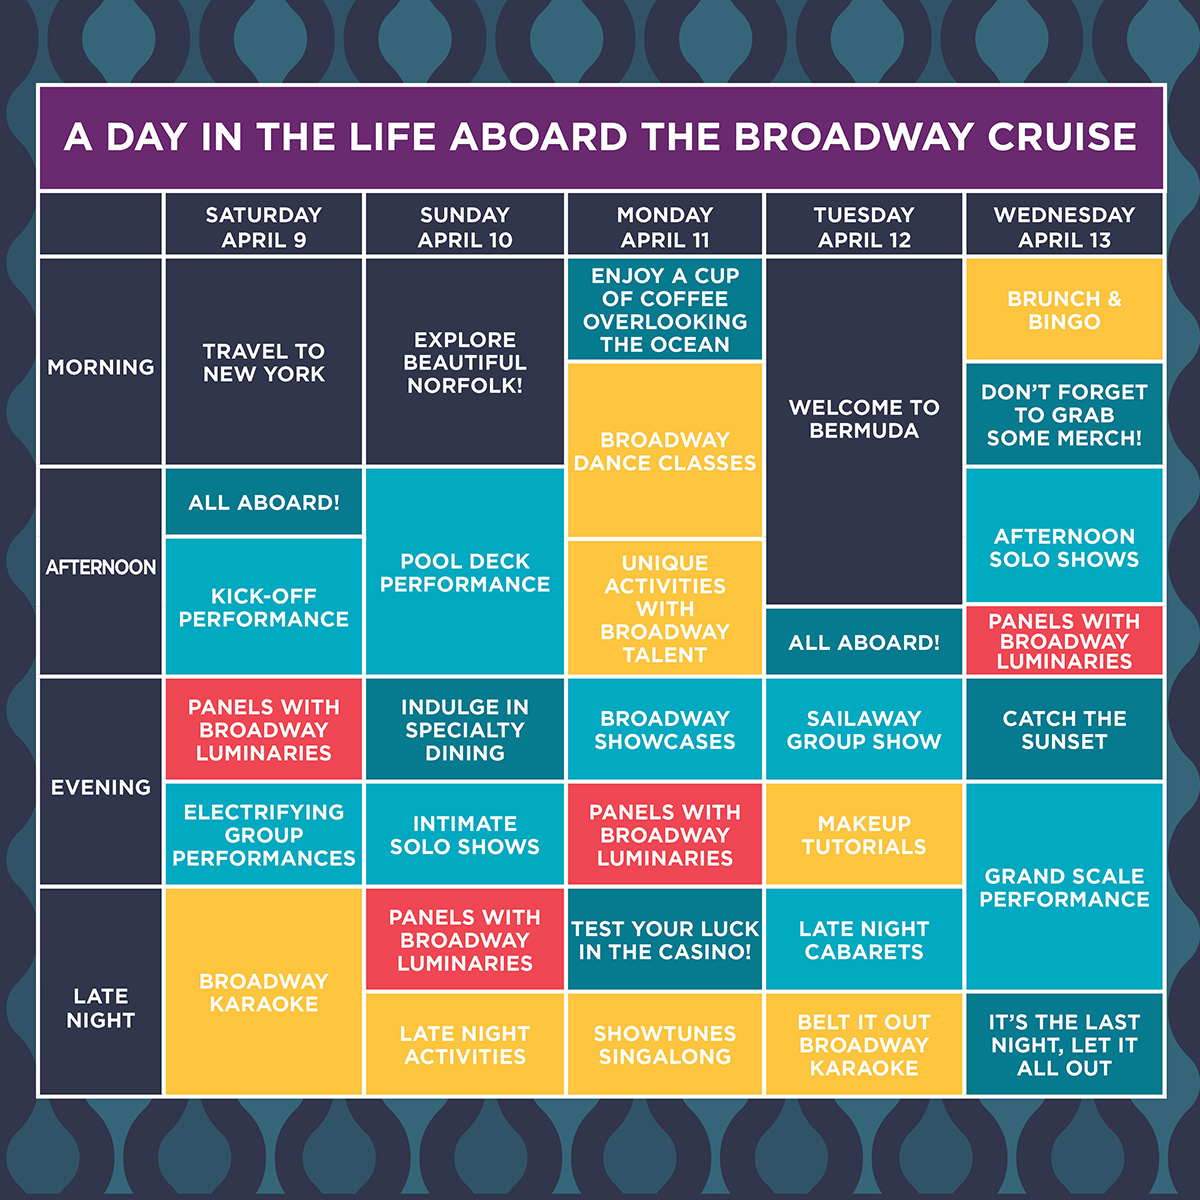 Here's What To Expect The Broadway Cruise